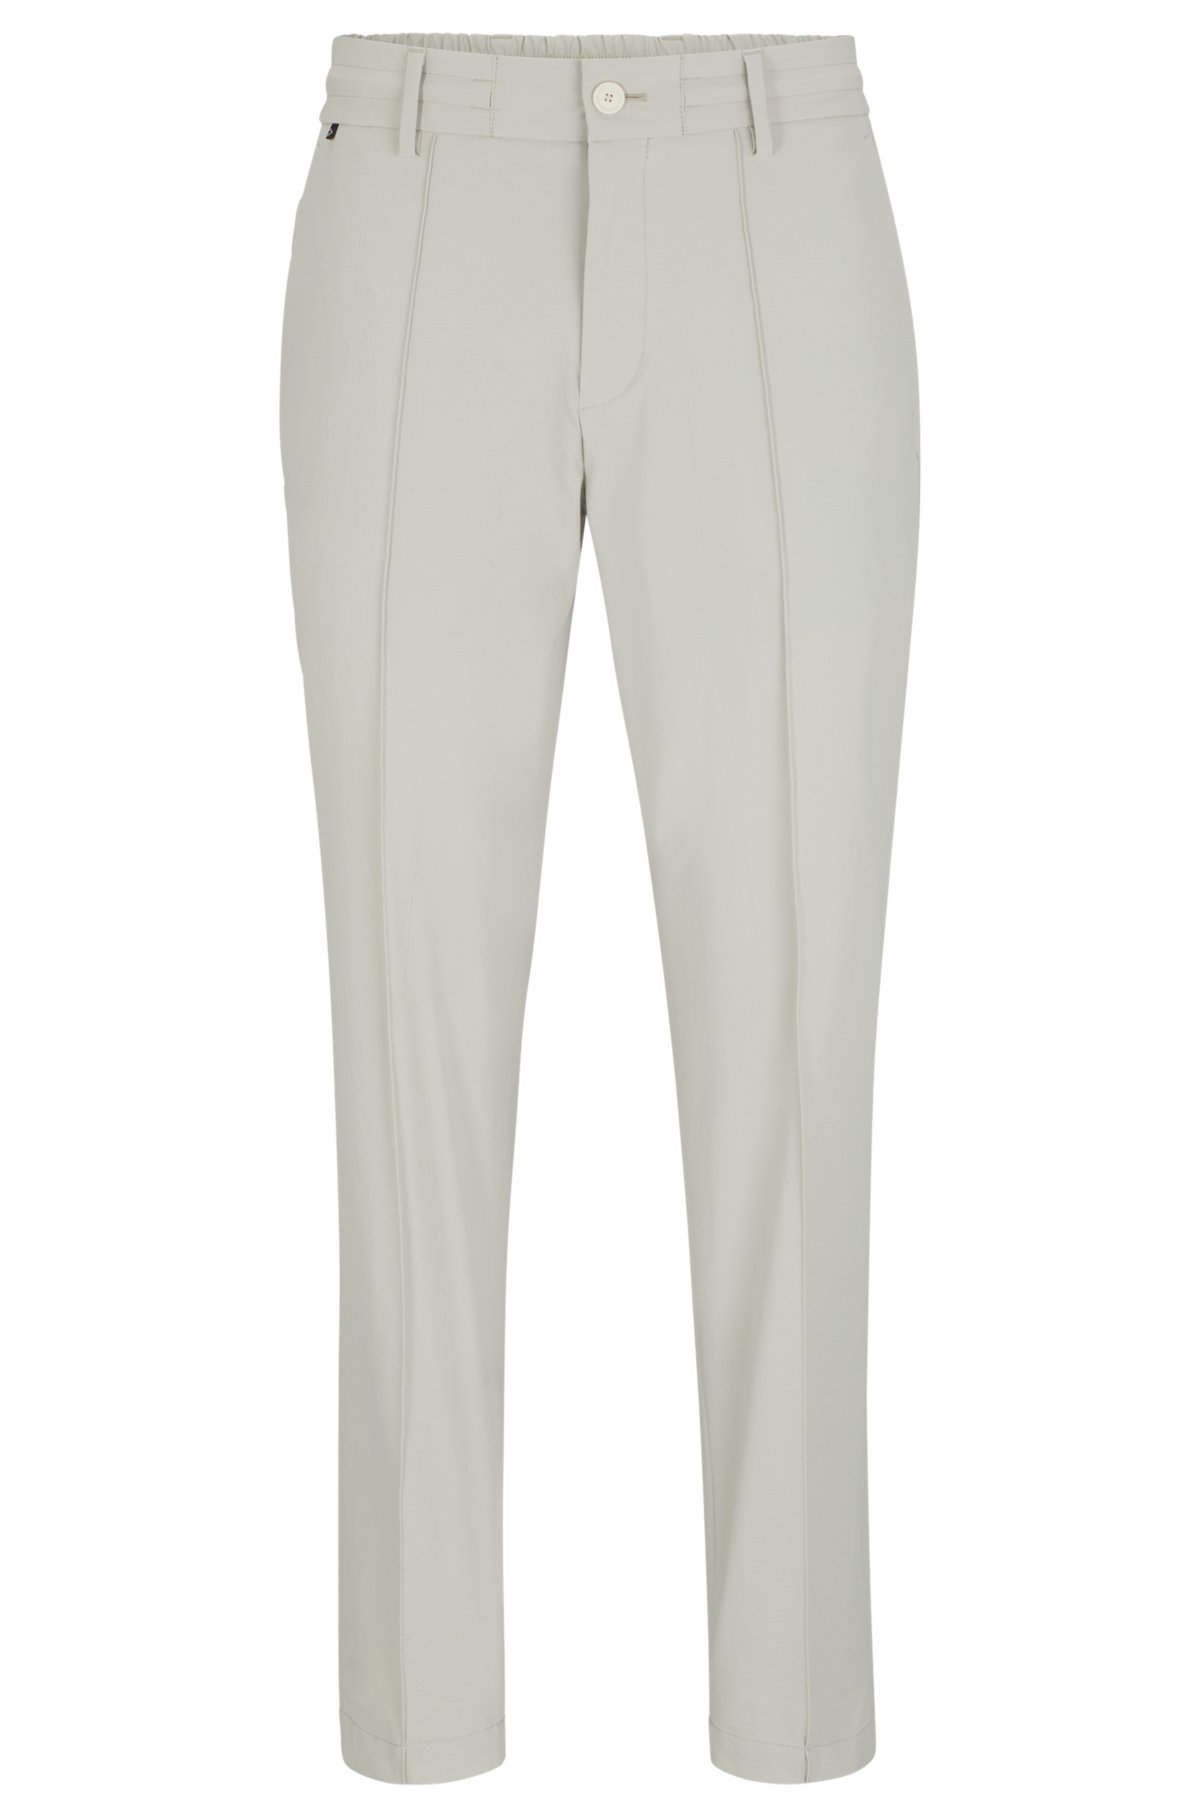 BNWT Forever New Womens Size 10 Slim Fit Work Pants Grey / Off White - RRP  $89.95(s)